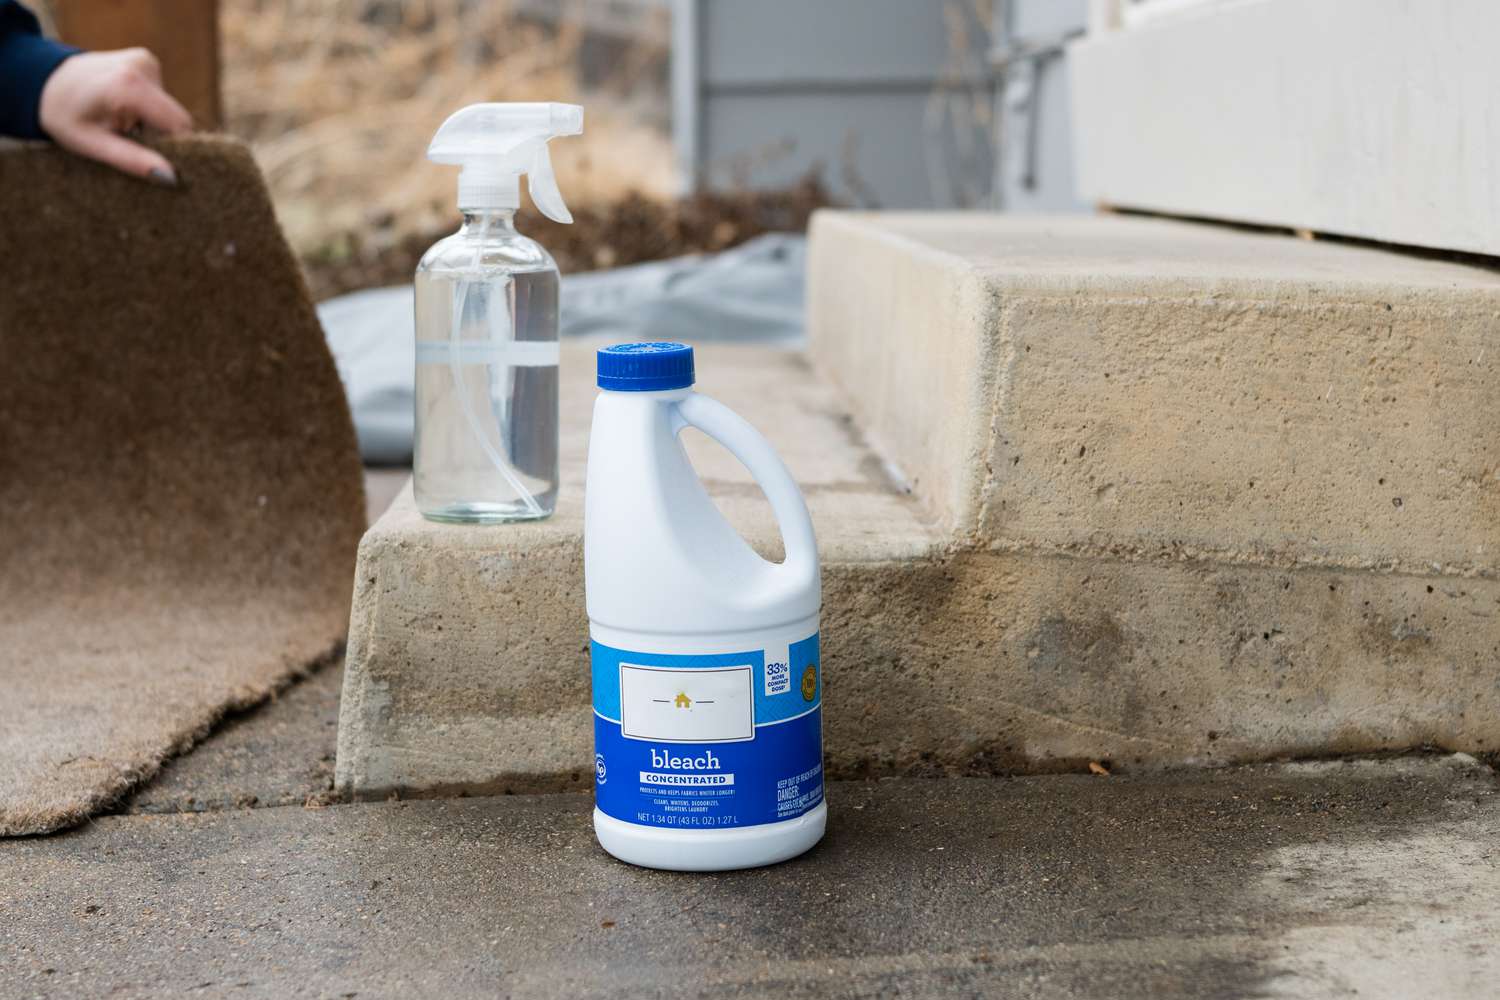 What Is The Difference Between Regular Bleach And Outdoor Bleach?